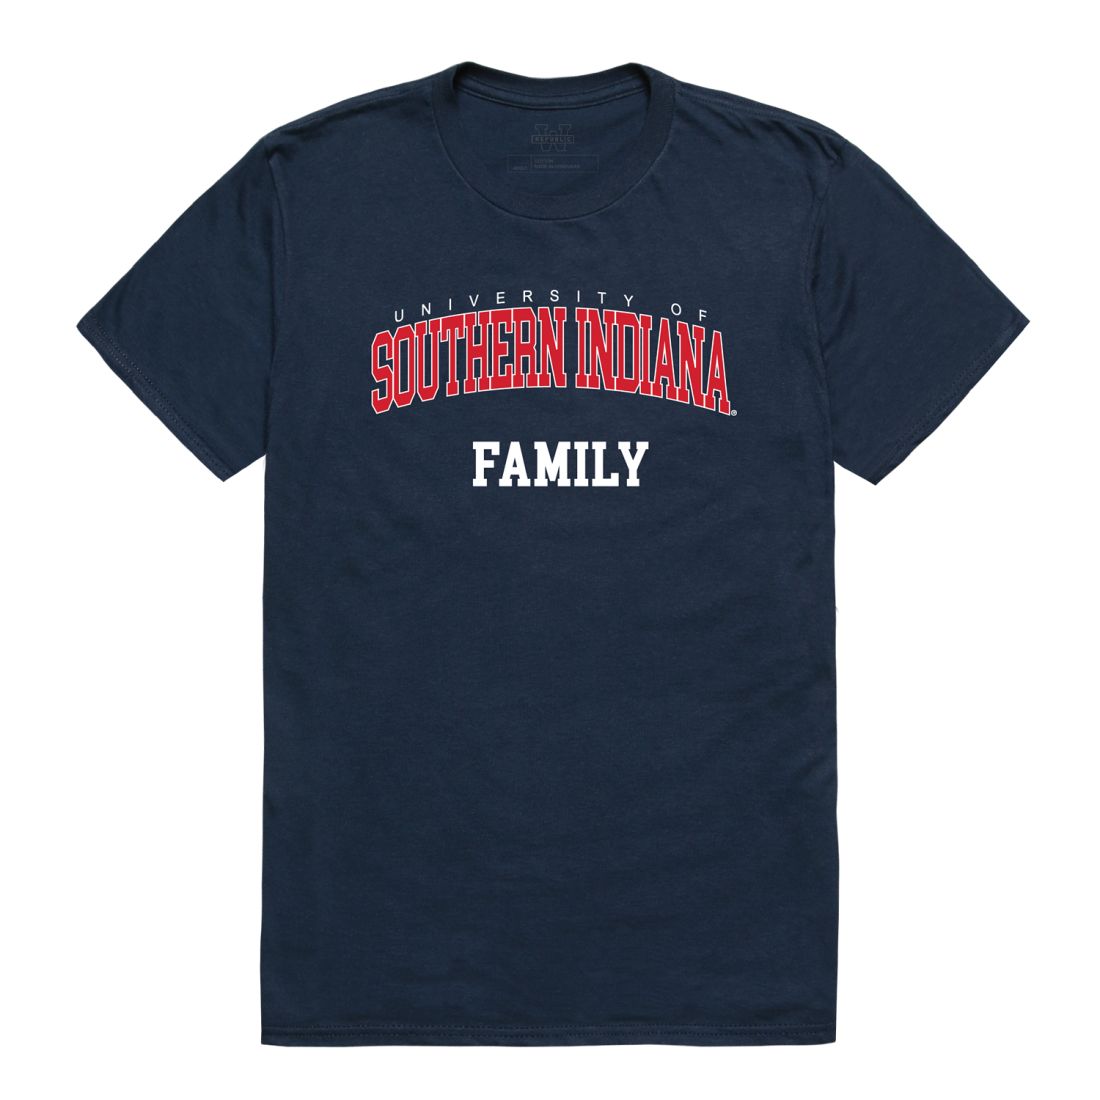 University of Southern Indiana Screaming Eagles Family T-Shirt